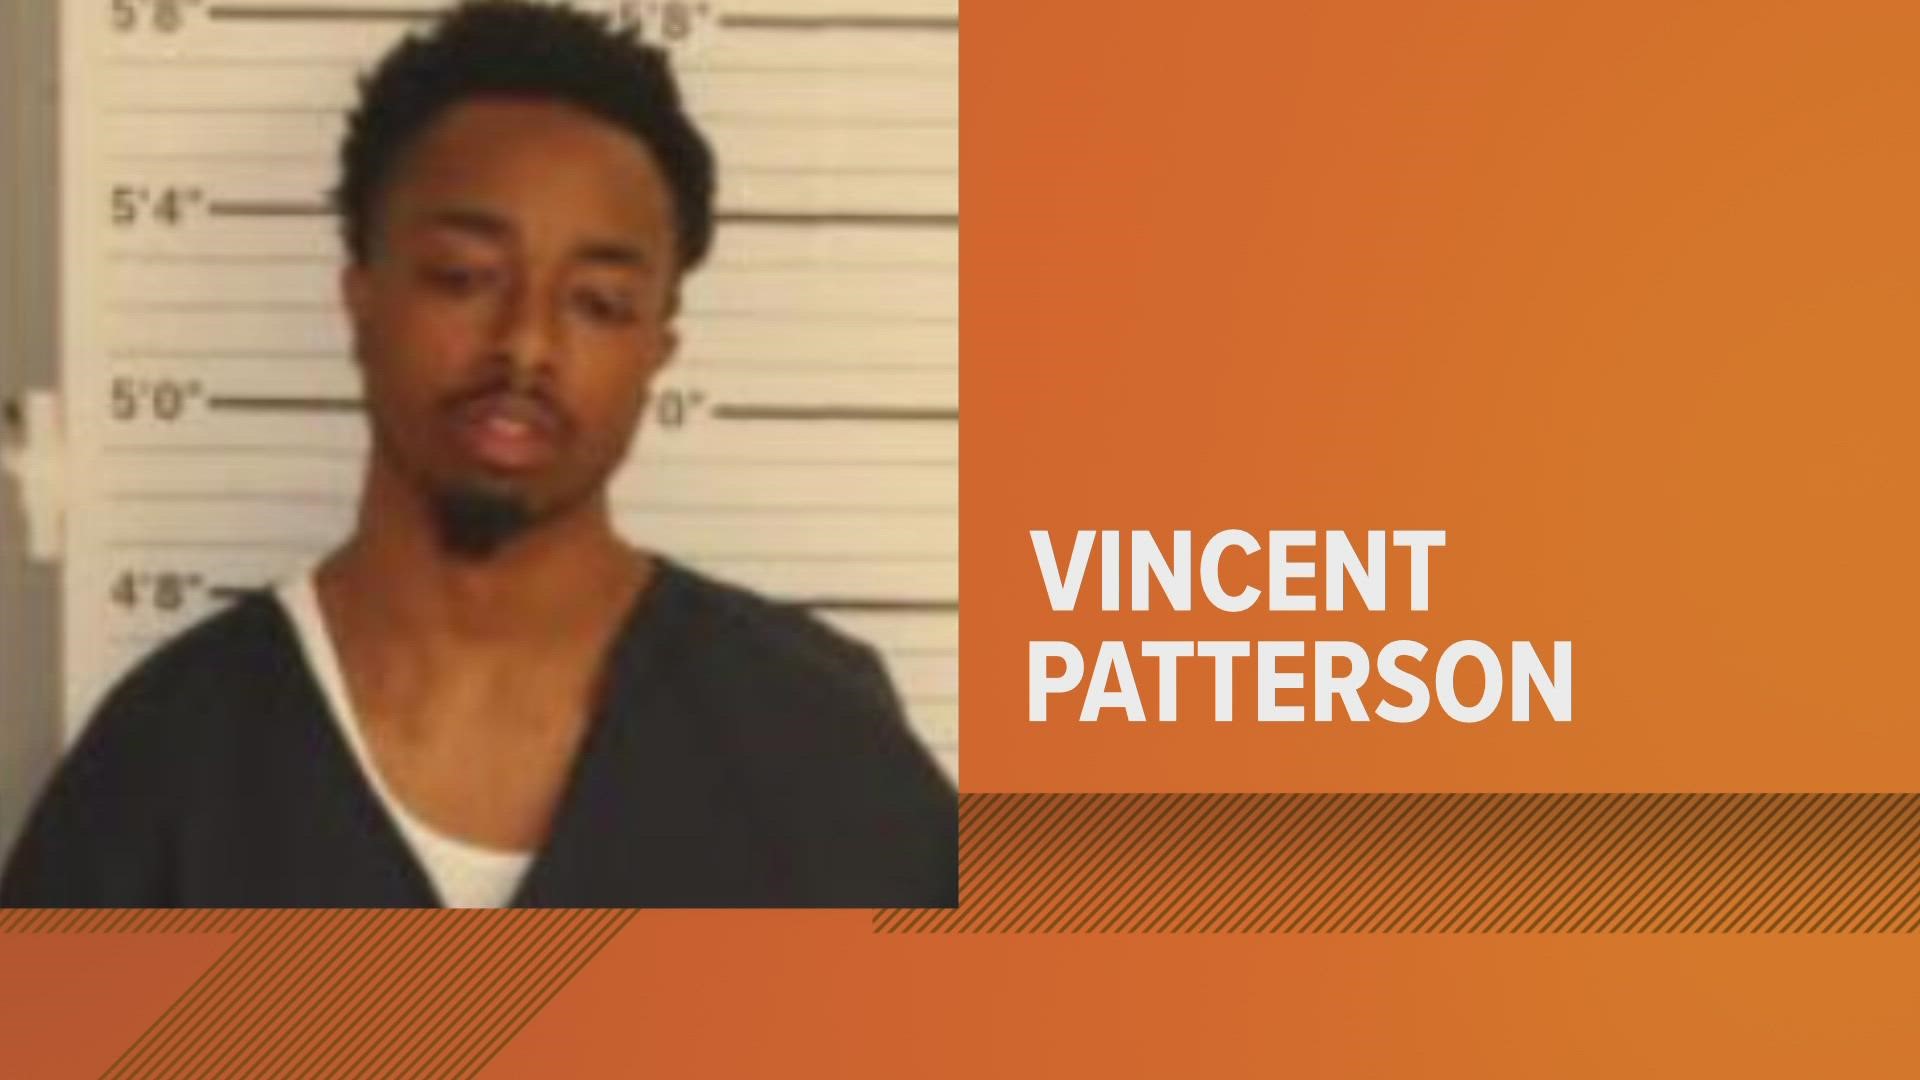 Vincent Paterson, 22, was arrested Friday, Jan. 6. He is accused of murdering 25-year-old Barshay Wilson, and he has been charged with first degree murder.